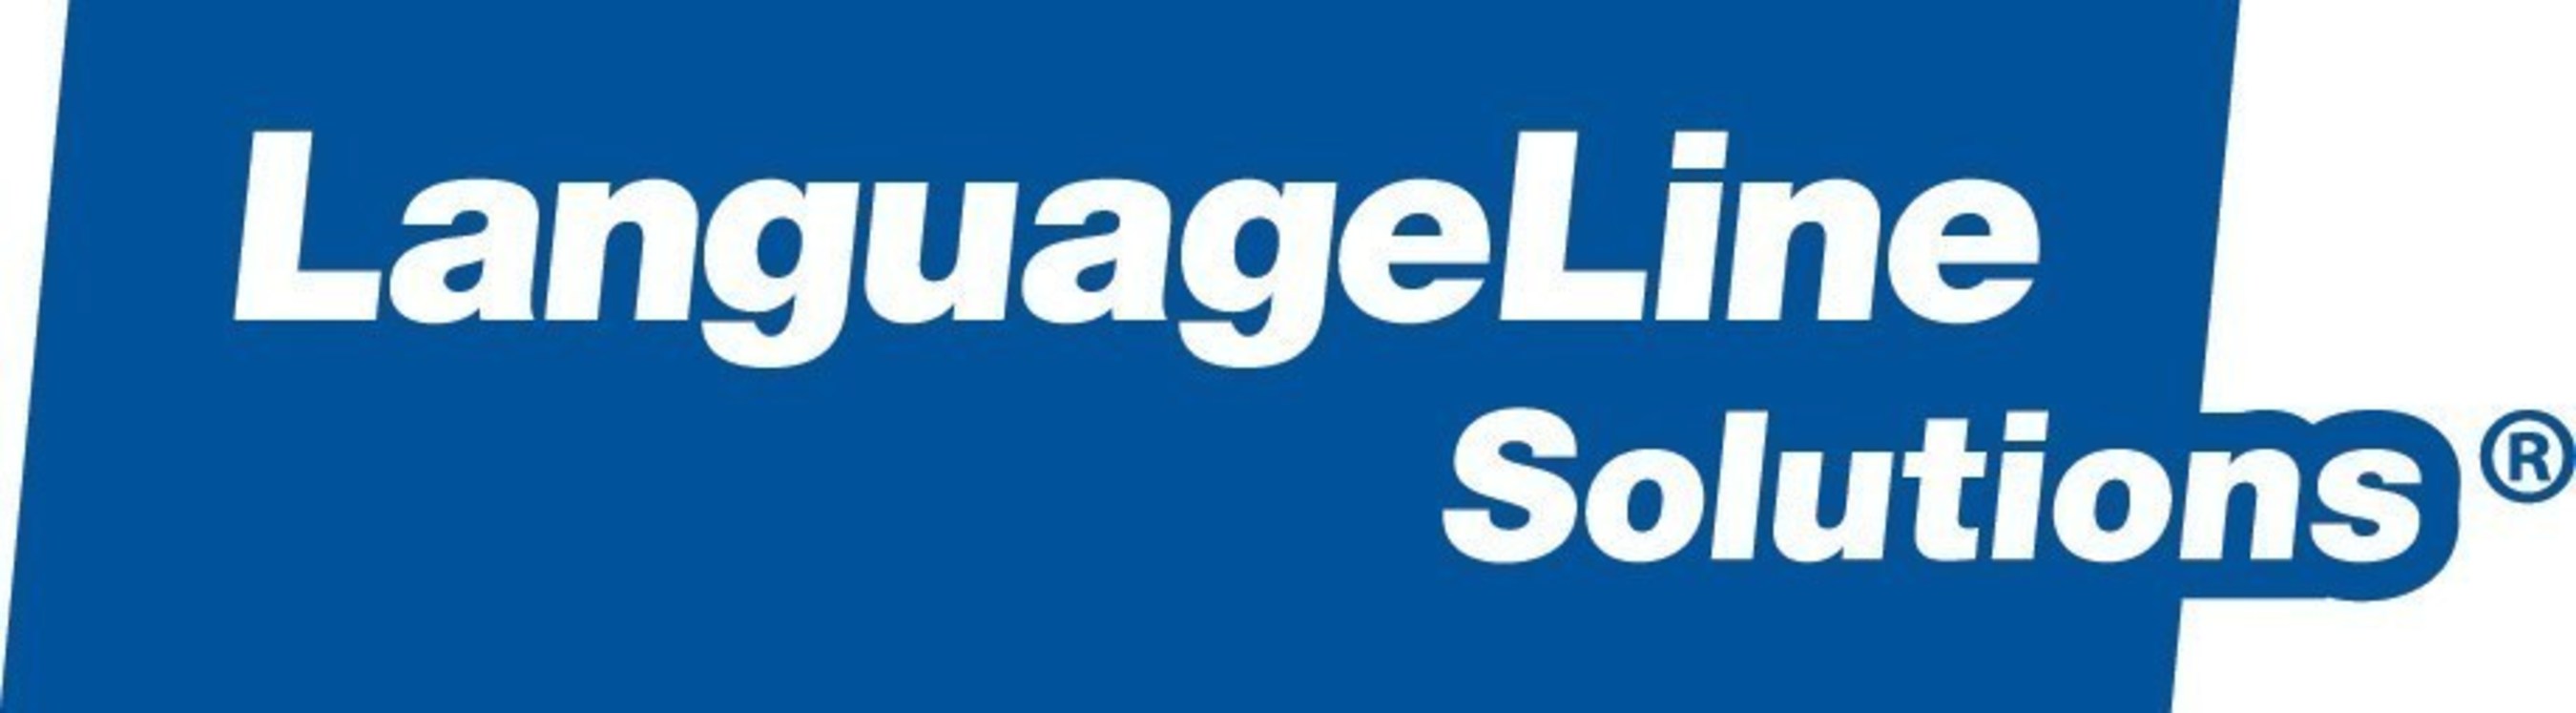 LanguageLine Solutions Adds Clarity to Their Translation Solution